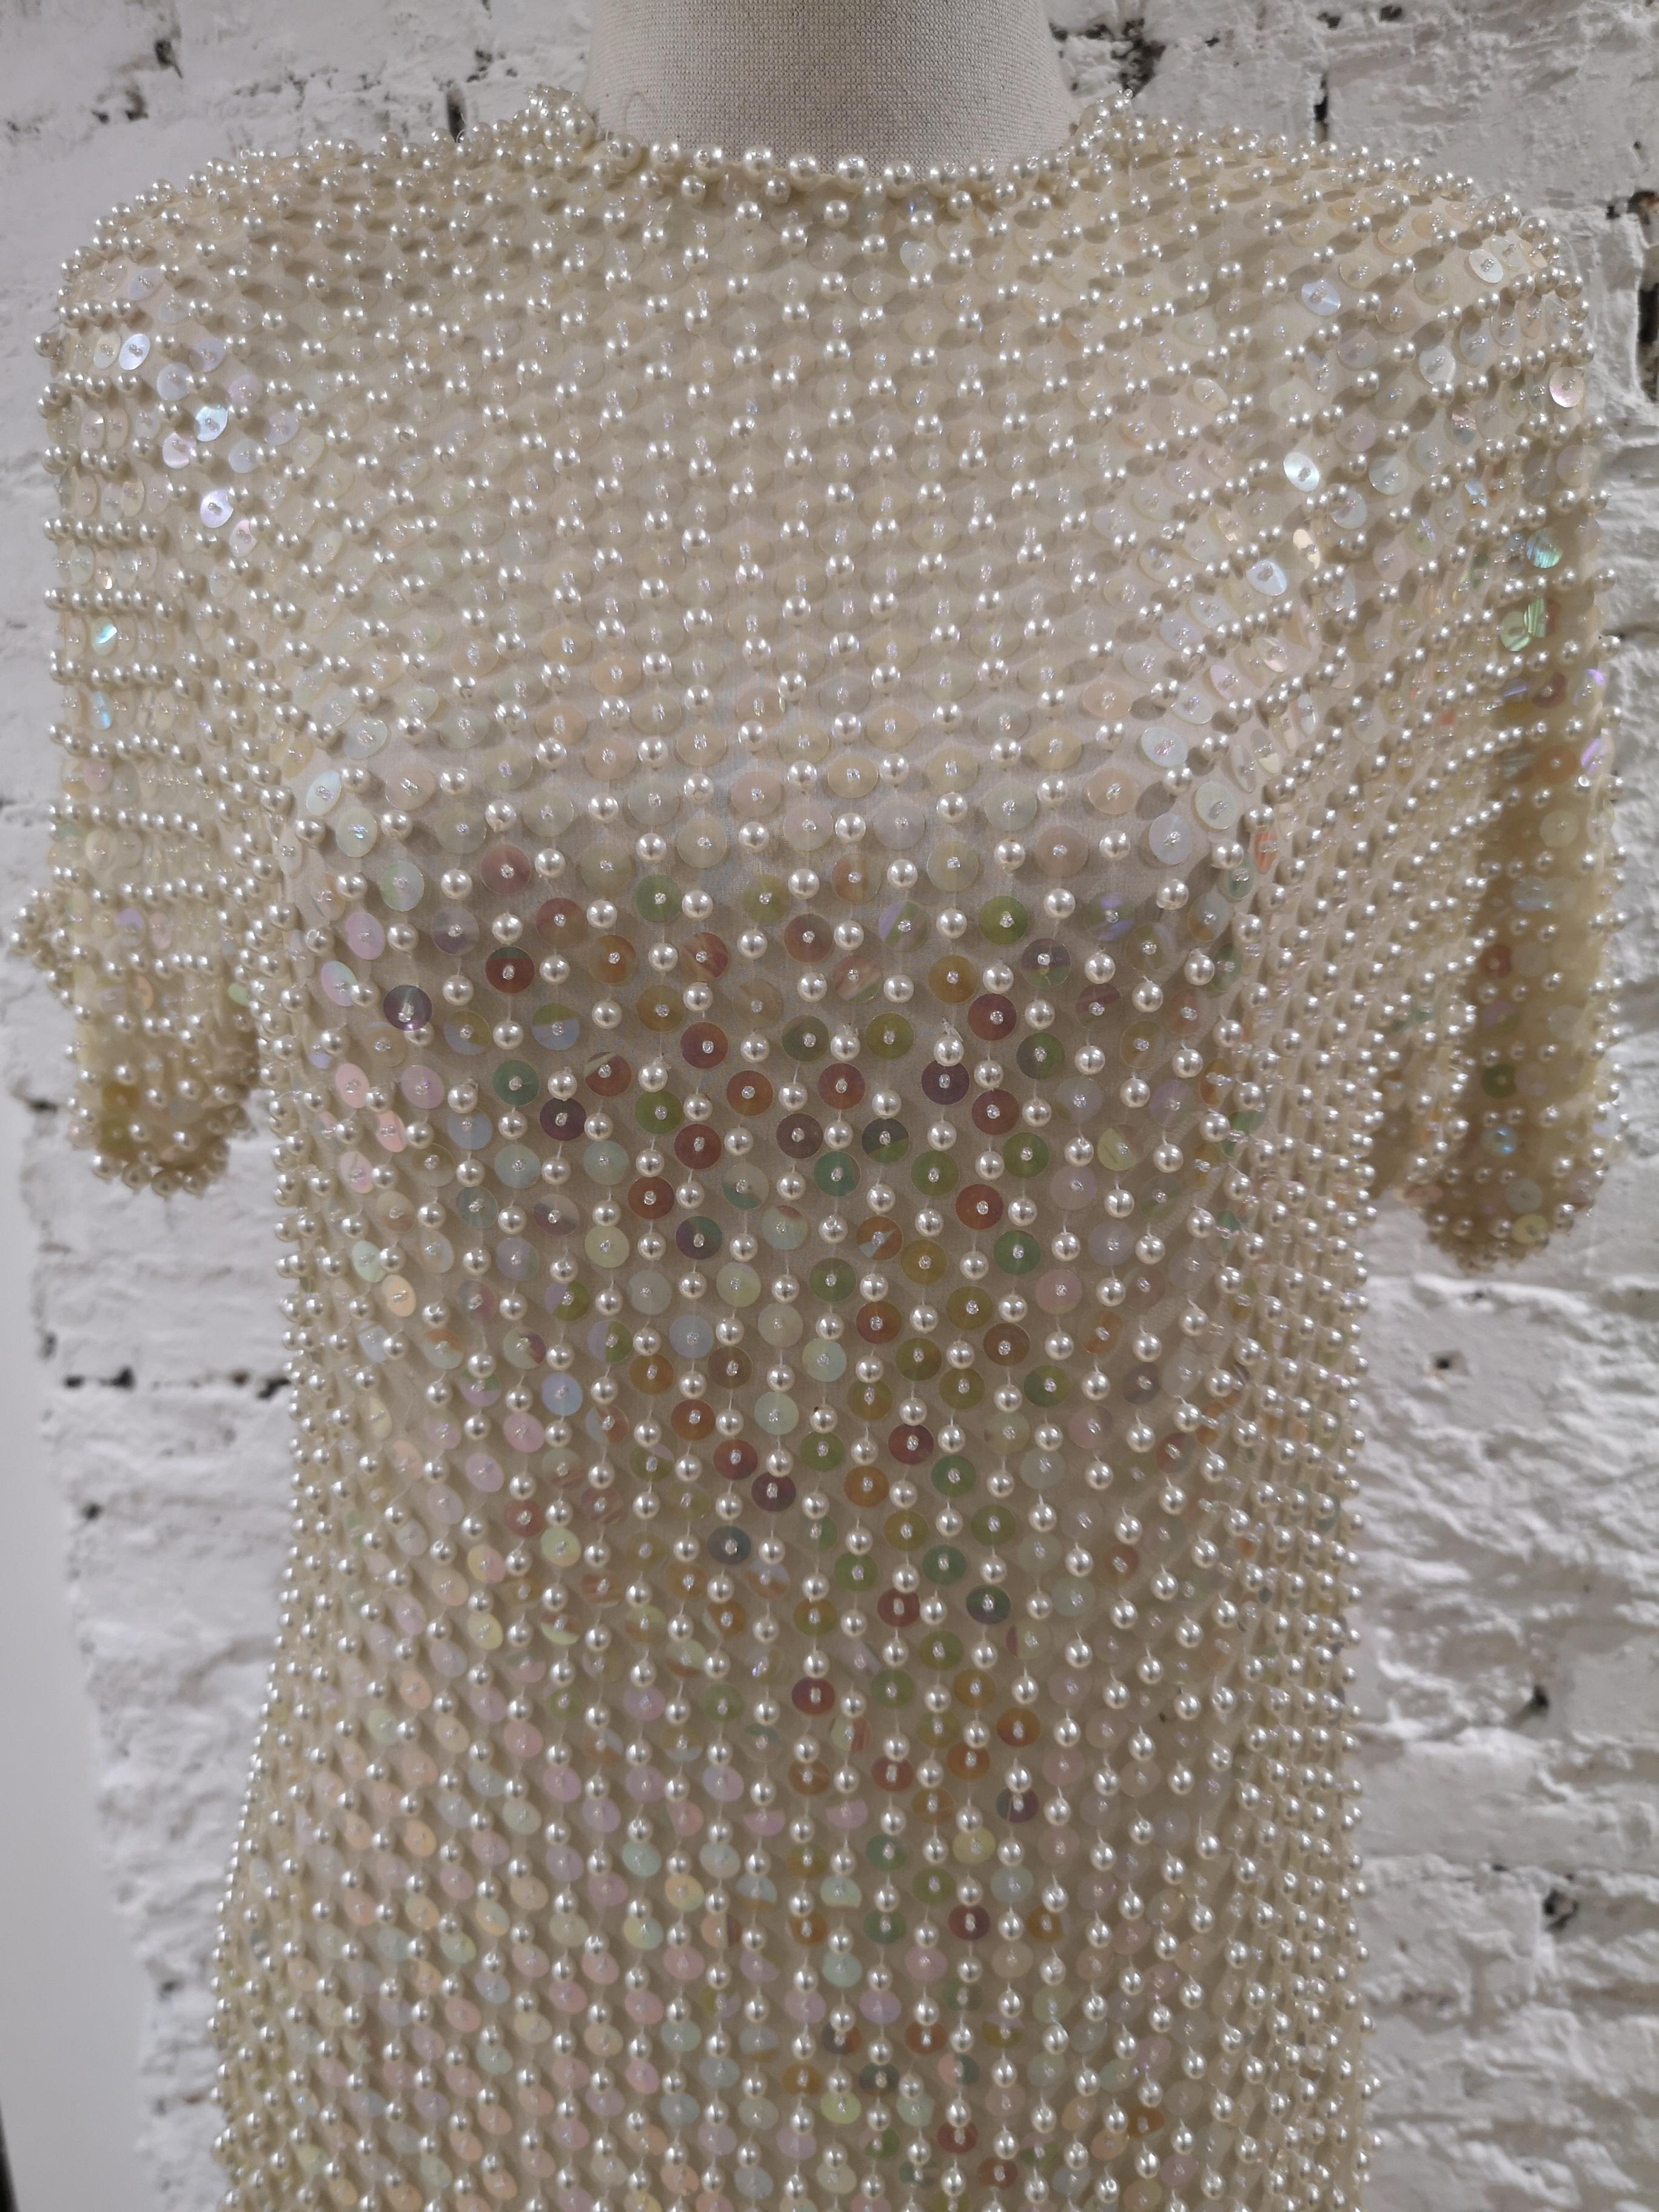 R. Carrano cream beads dress
Size 10
still with original tag, some beads are missing